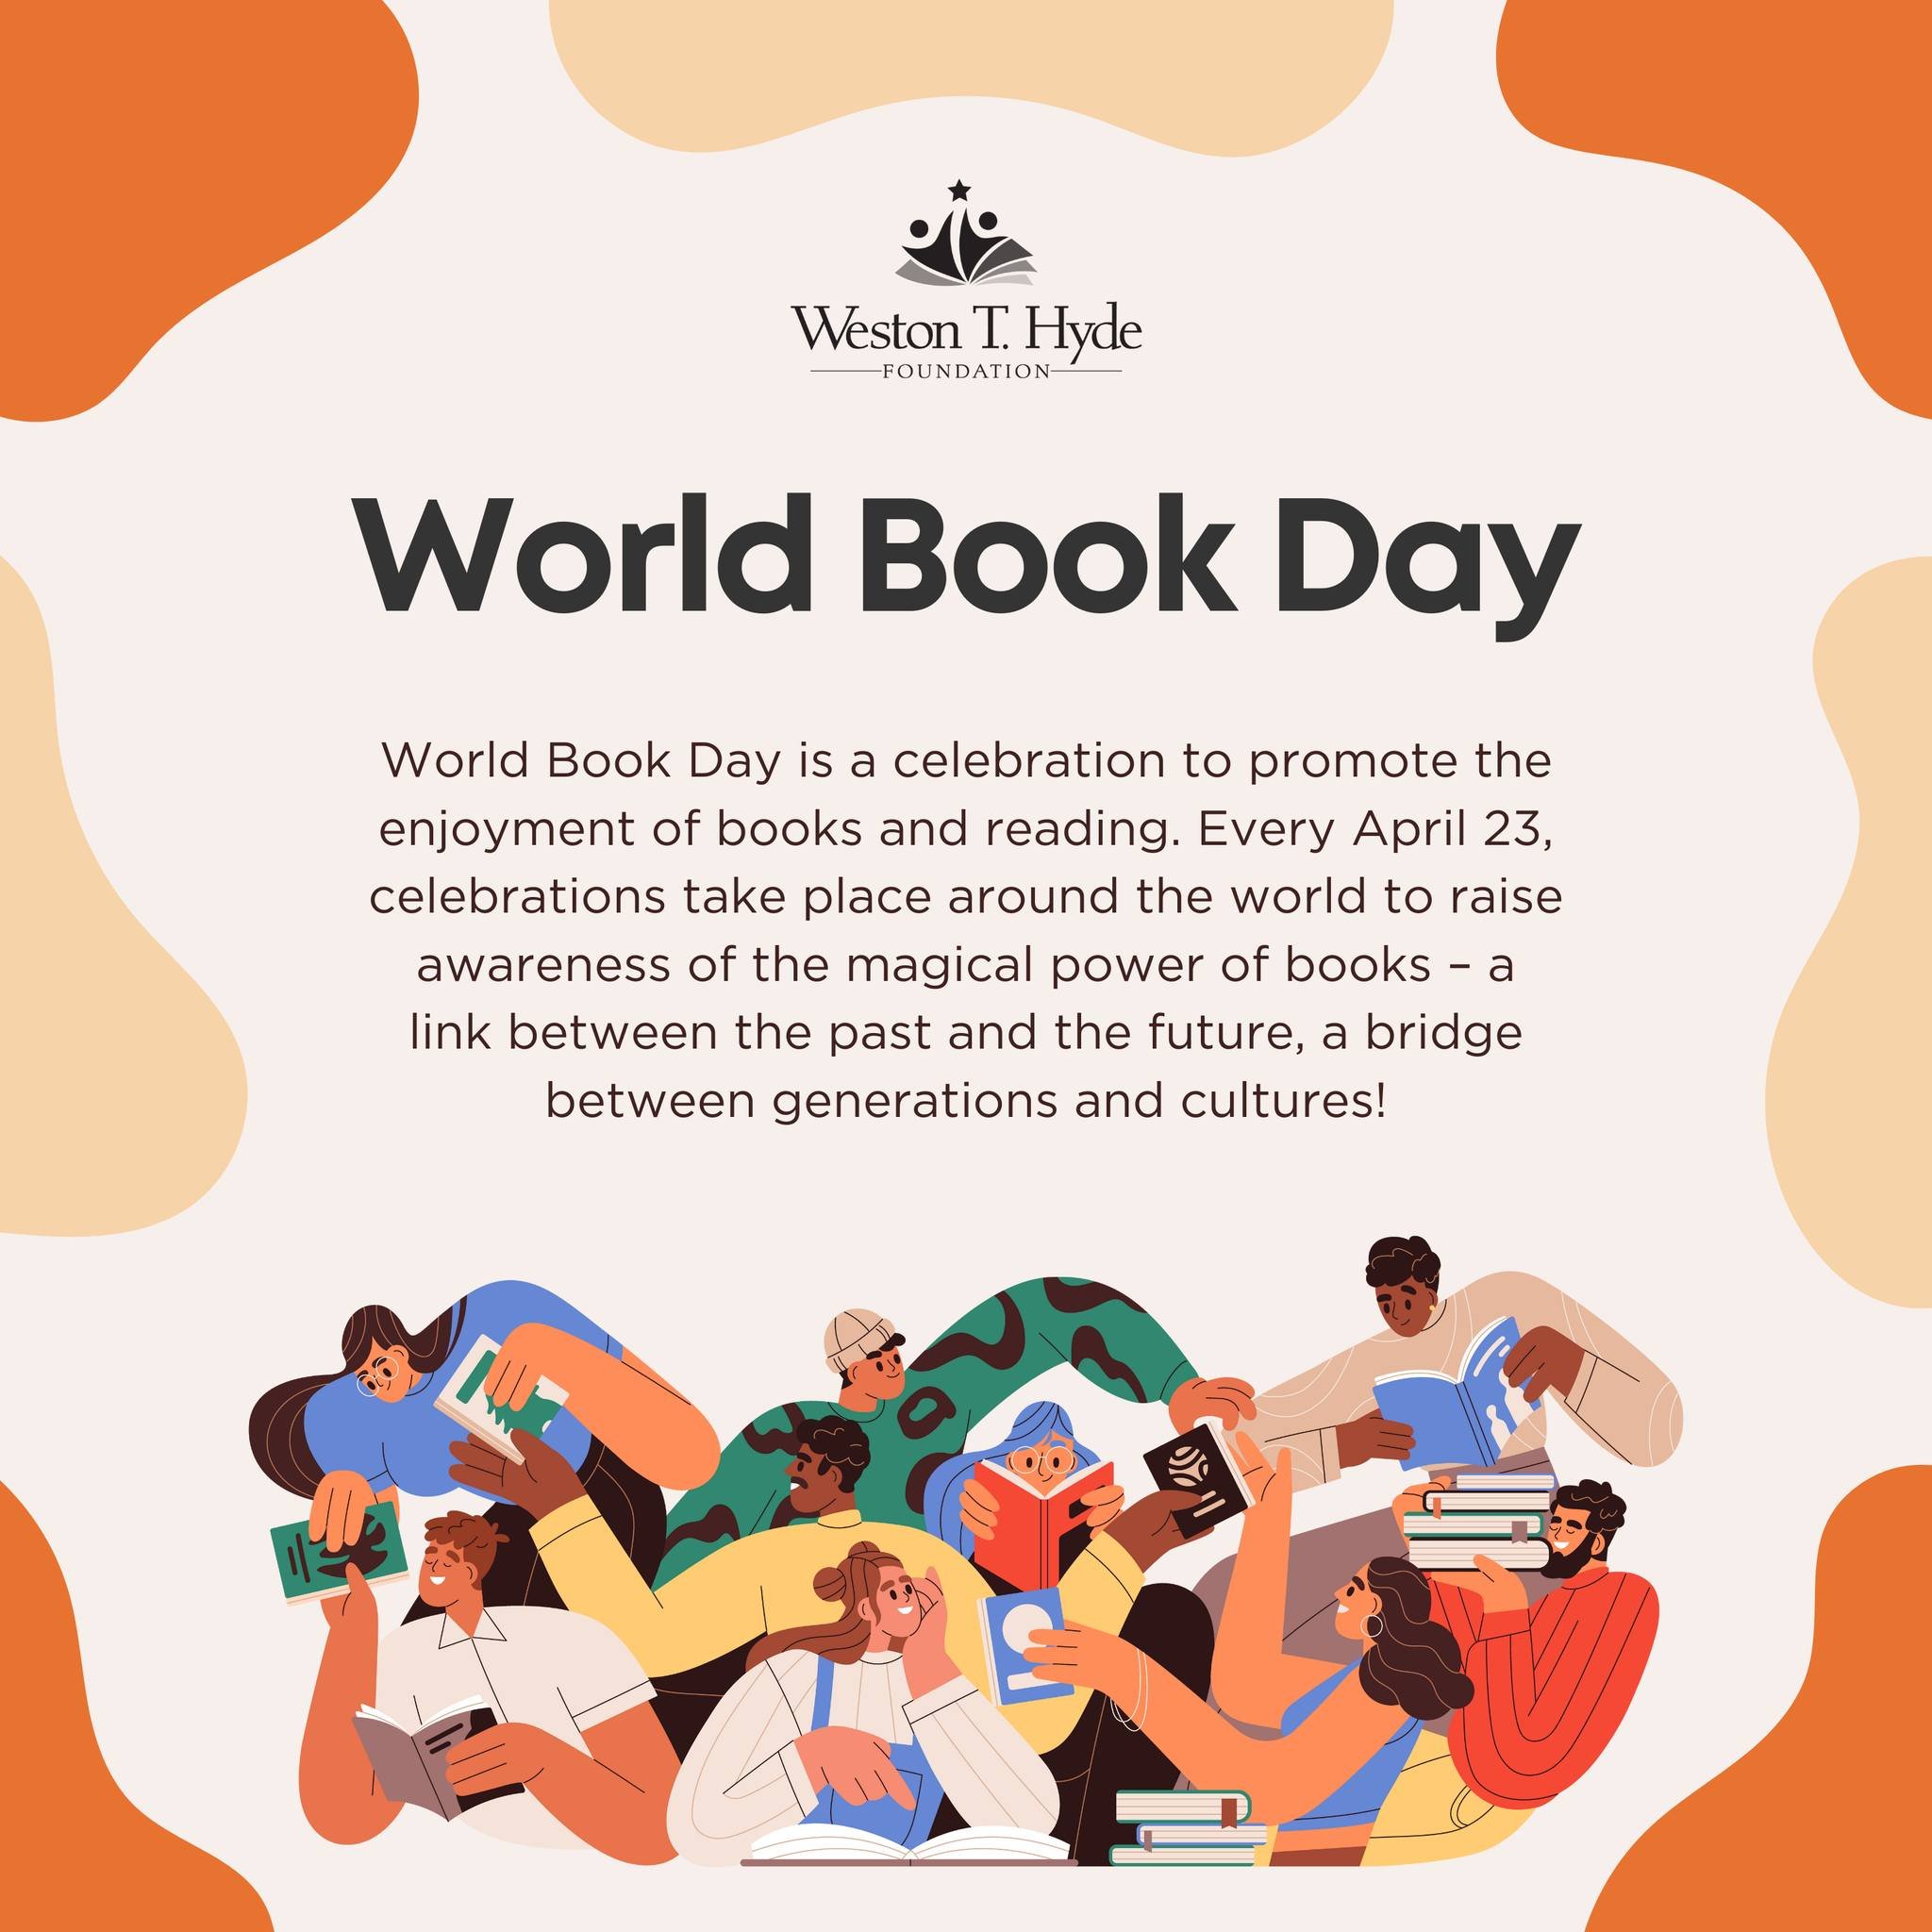 📚 Whether you prefer fiction, non-fiction, poetry, or any other genre, books have the ability to enrich our lives and broaden our horizons. So let's take some time today to appreciate the joy of reading and the amazing authors who have given us so m